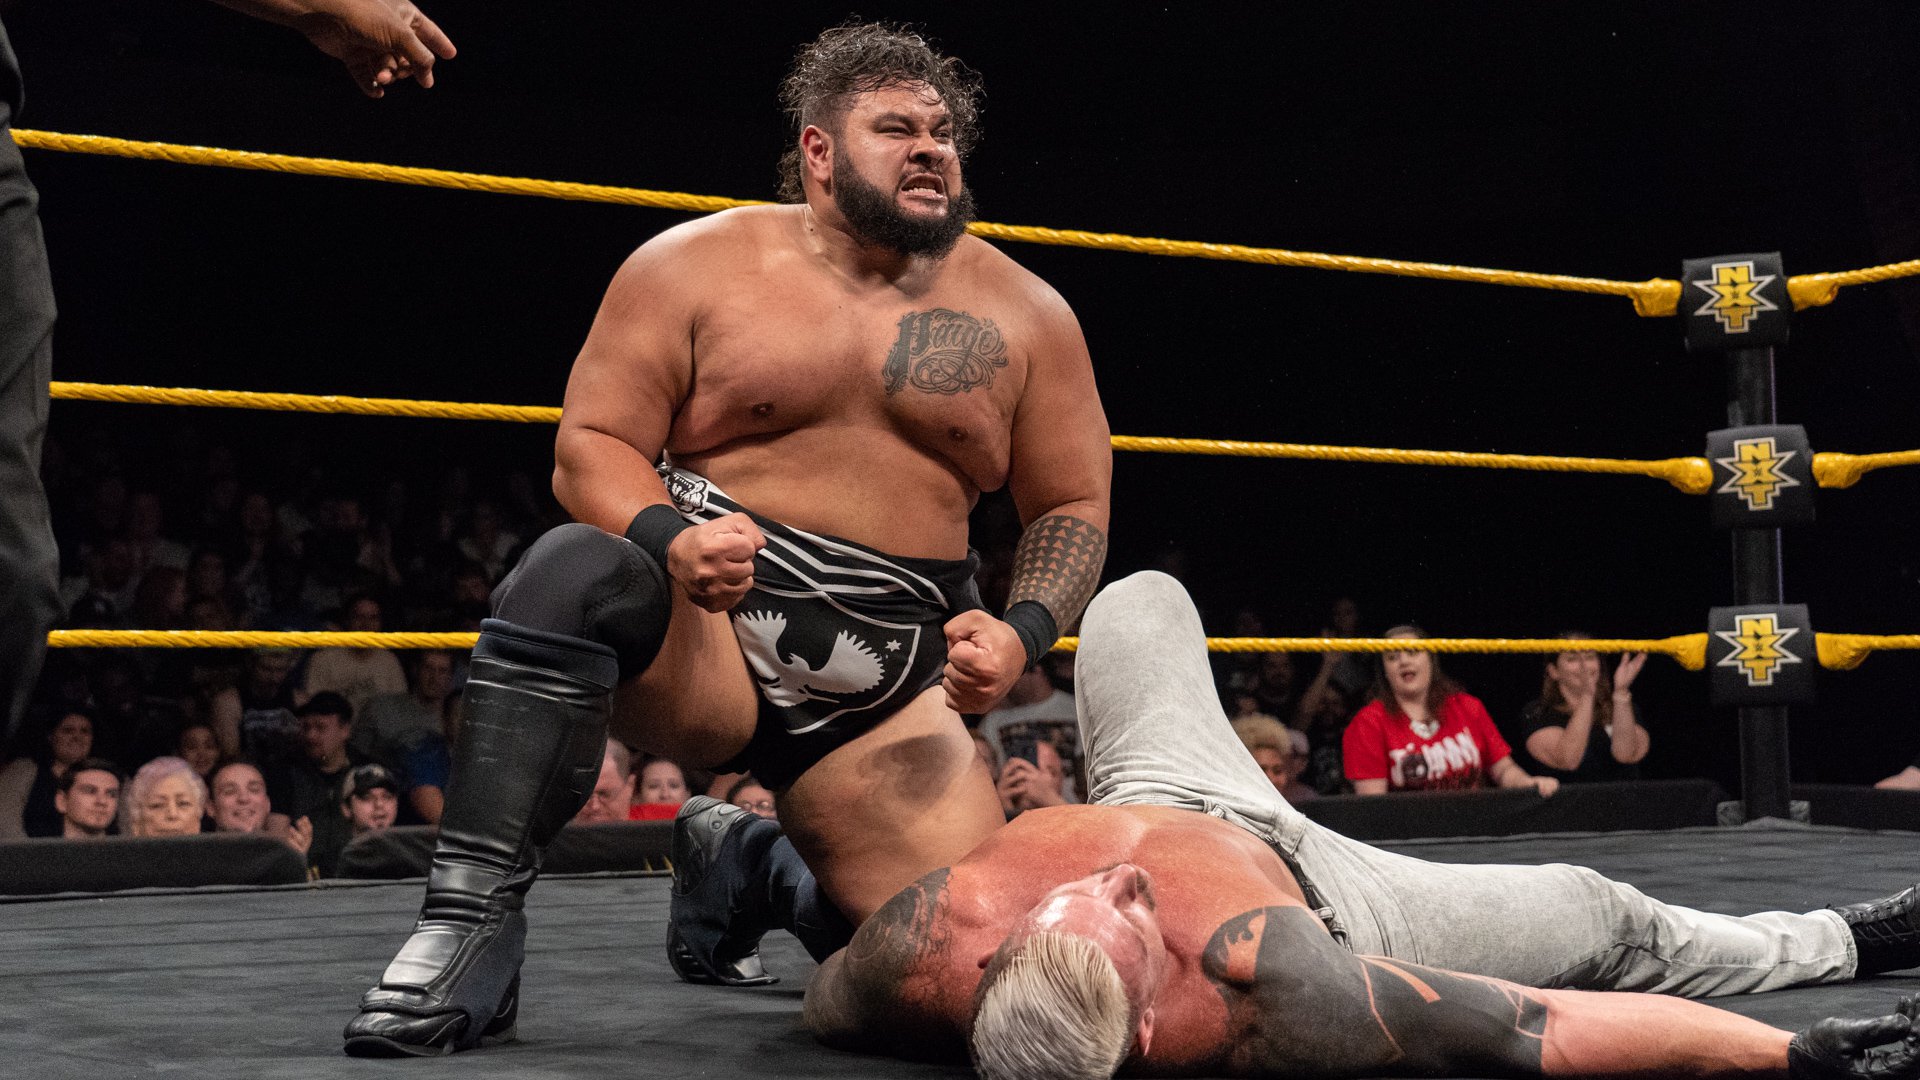 Bronson Reed def. Dexter Lumis in the first round of the NXT Breakout Tournament